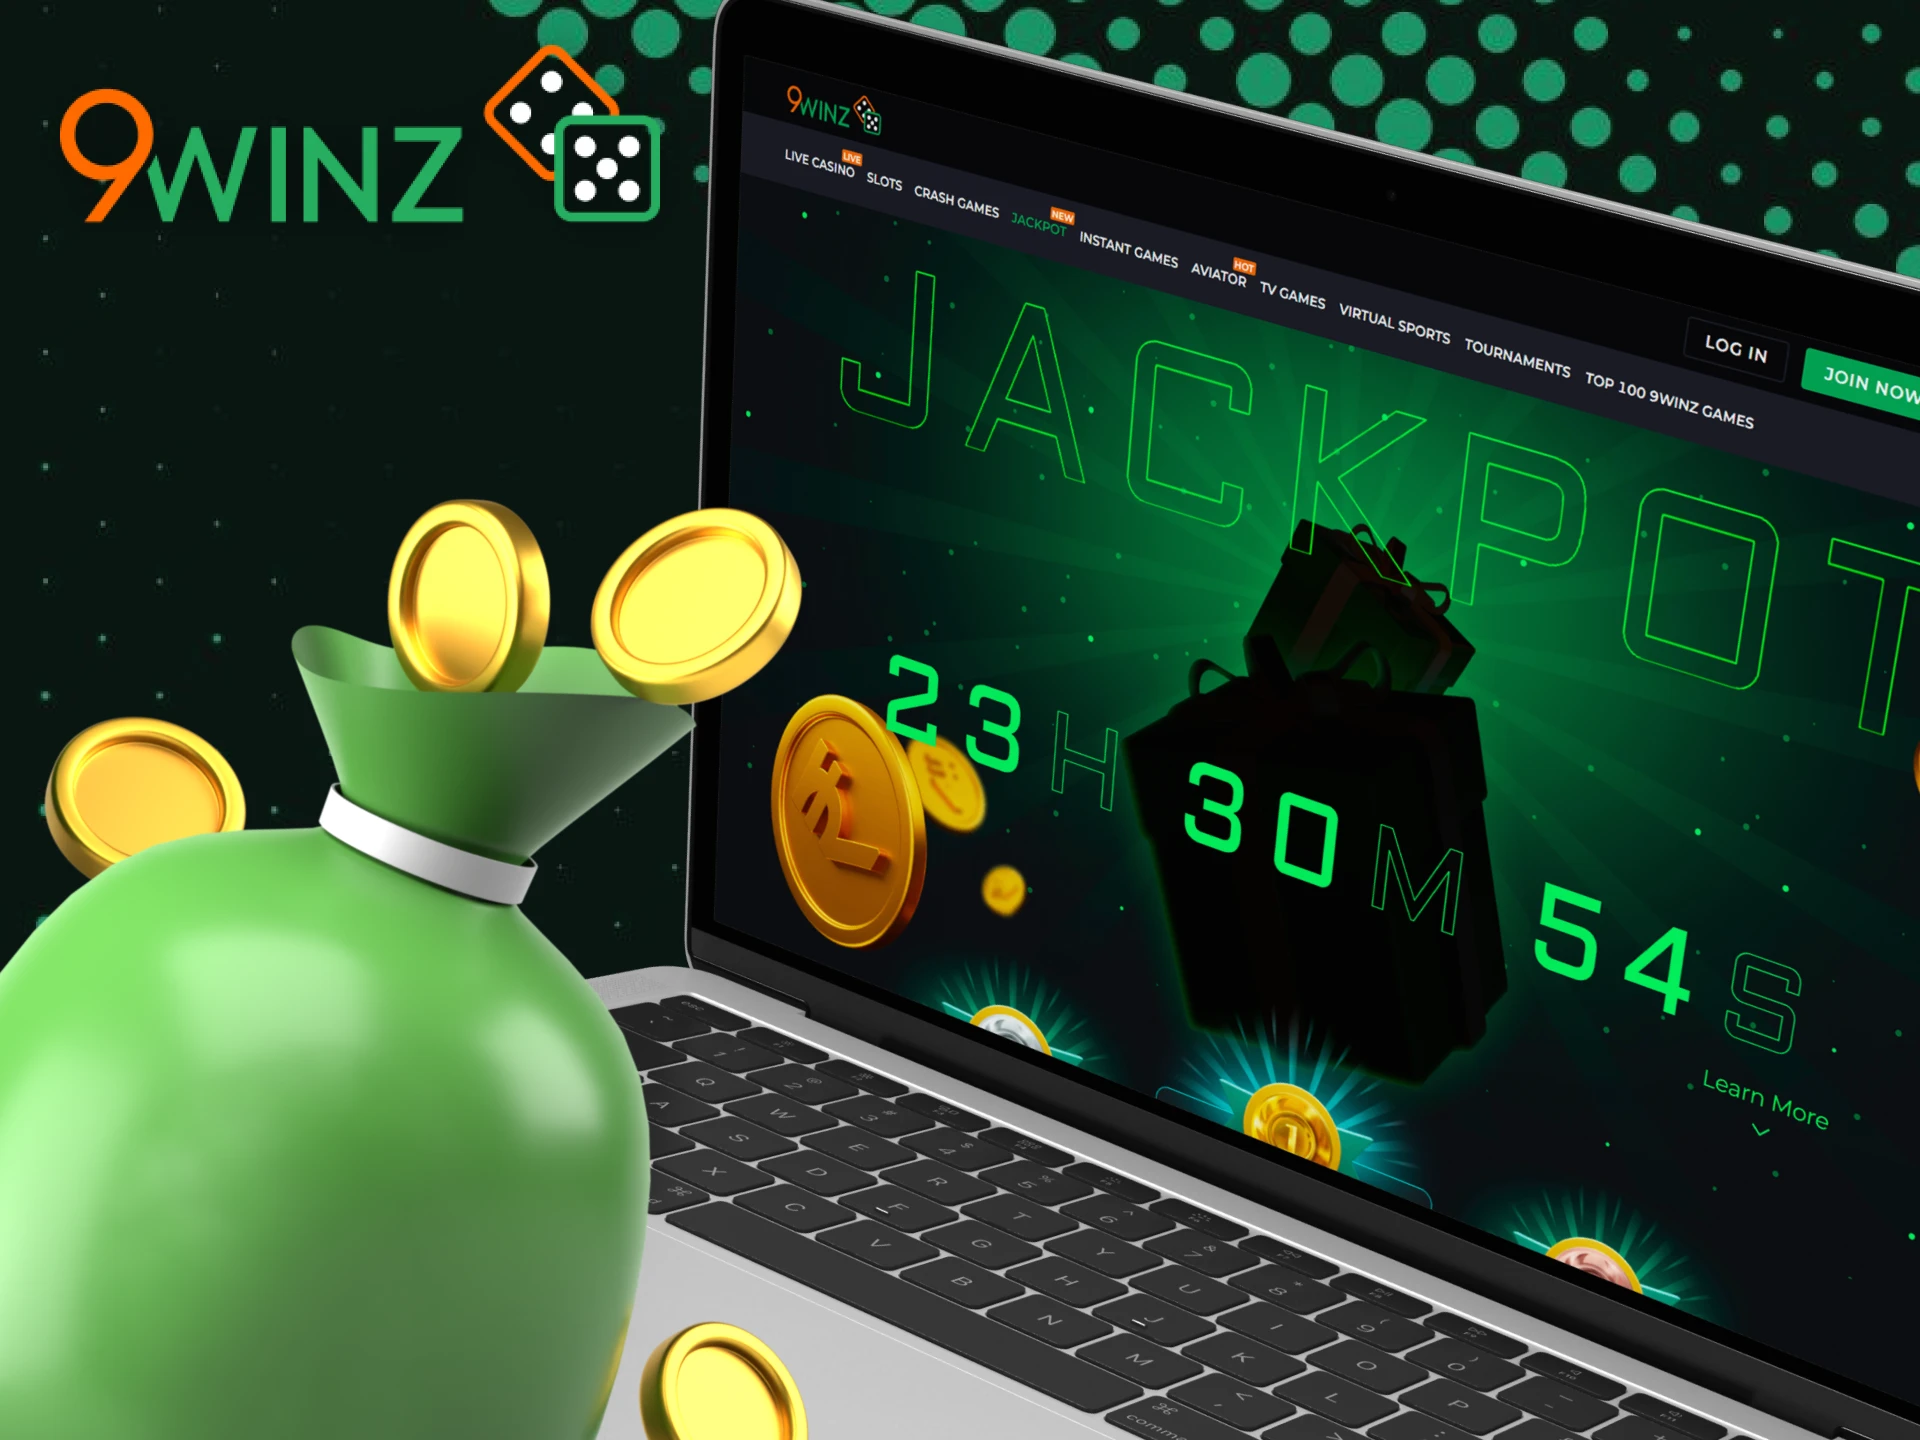 9Winz Casino offers all users who make a deposit a chance to participate in the daily jackpot draw.